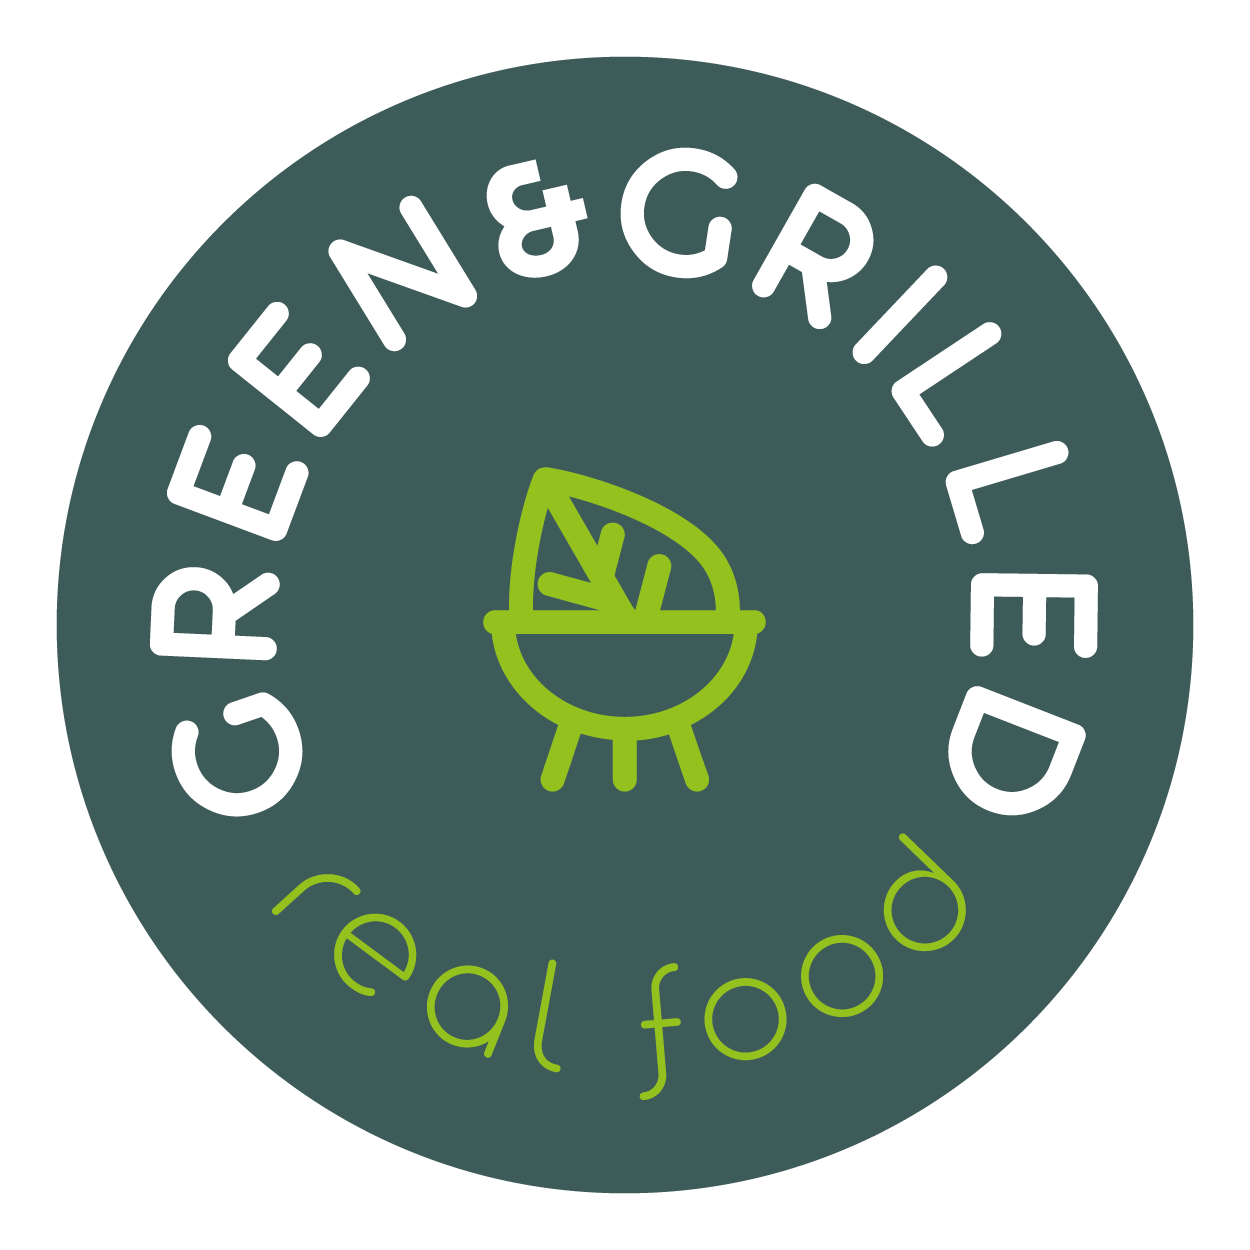 Green & Grilled